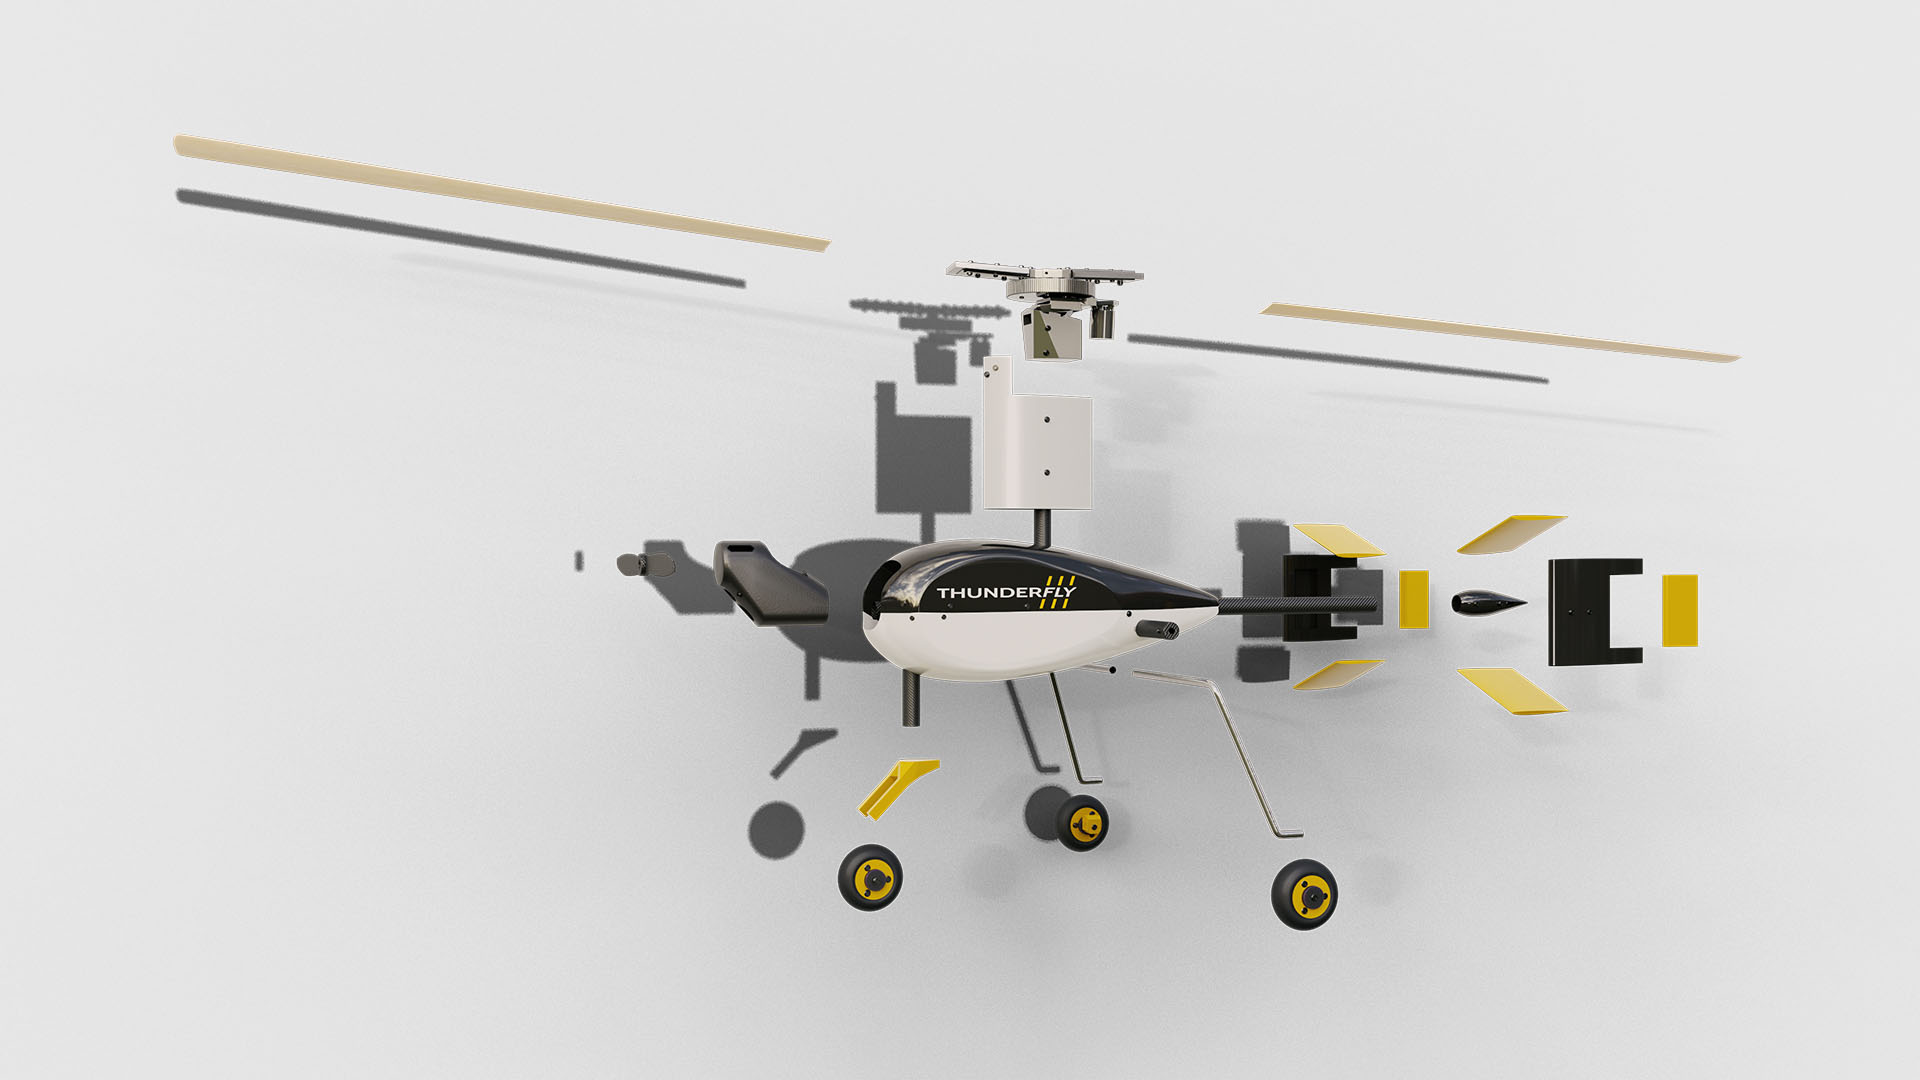 The Autogyro’s modular design allows for various payloads and ground control stations